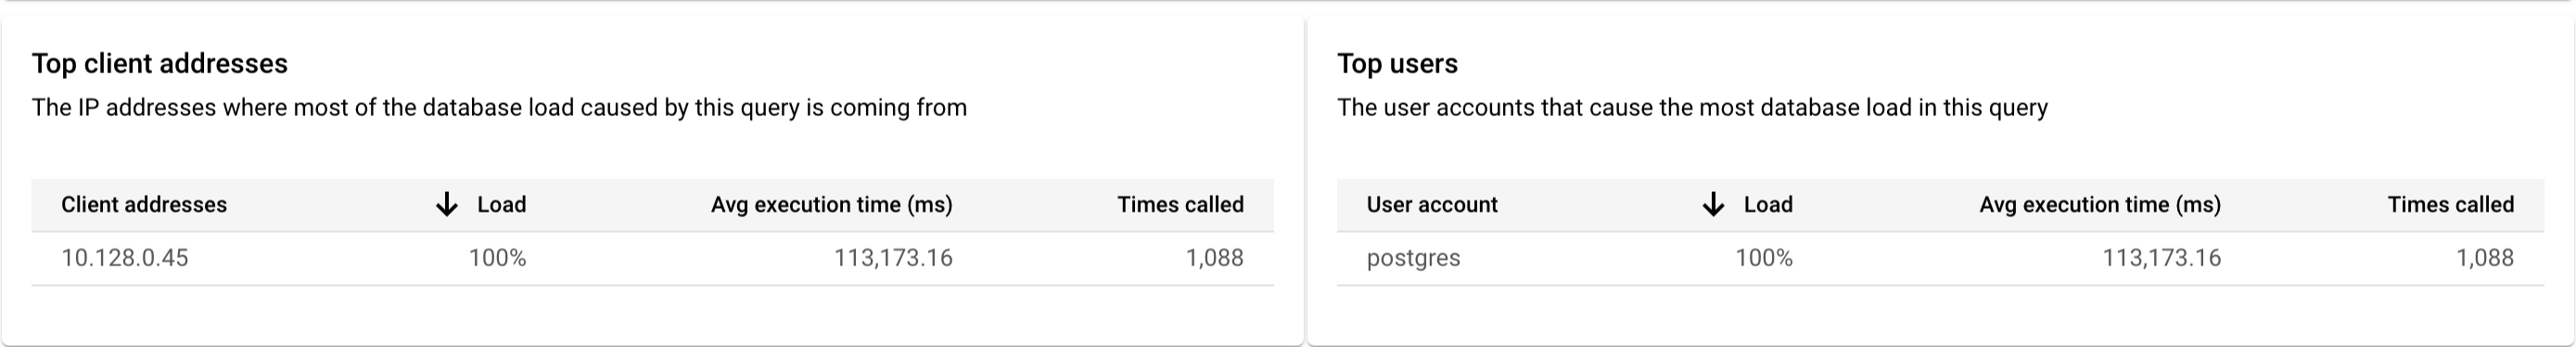 The image shows that for top client addresses, the load was
         100%, the average execution time was 19,568 seconds, and the times
         called was 1,226. For top users, the user postgres had 100% of the load,
         had an average execution time of 19,568 ms, and was called 1,226
         times.